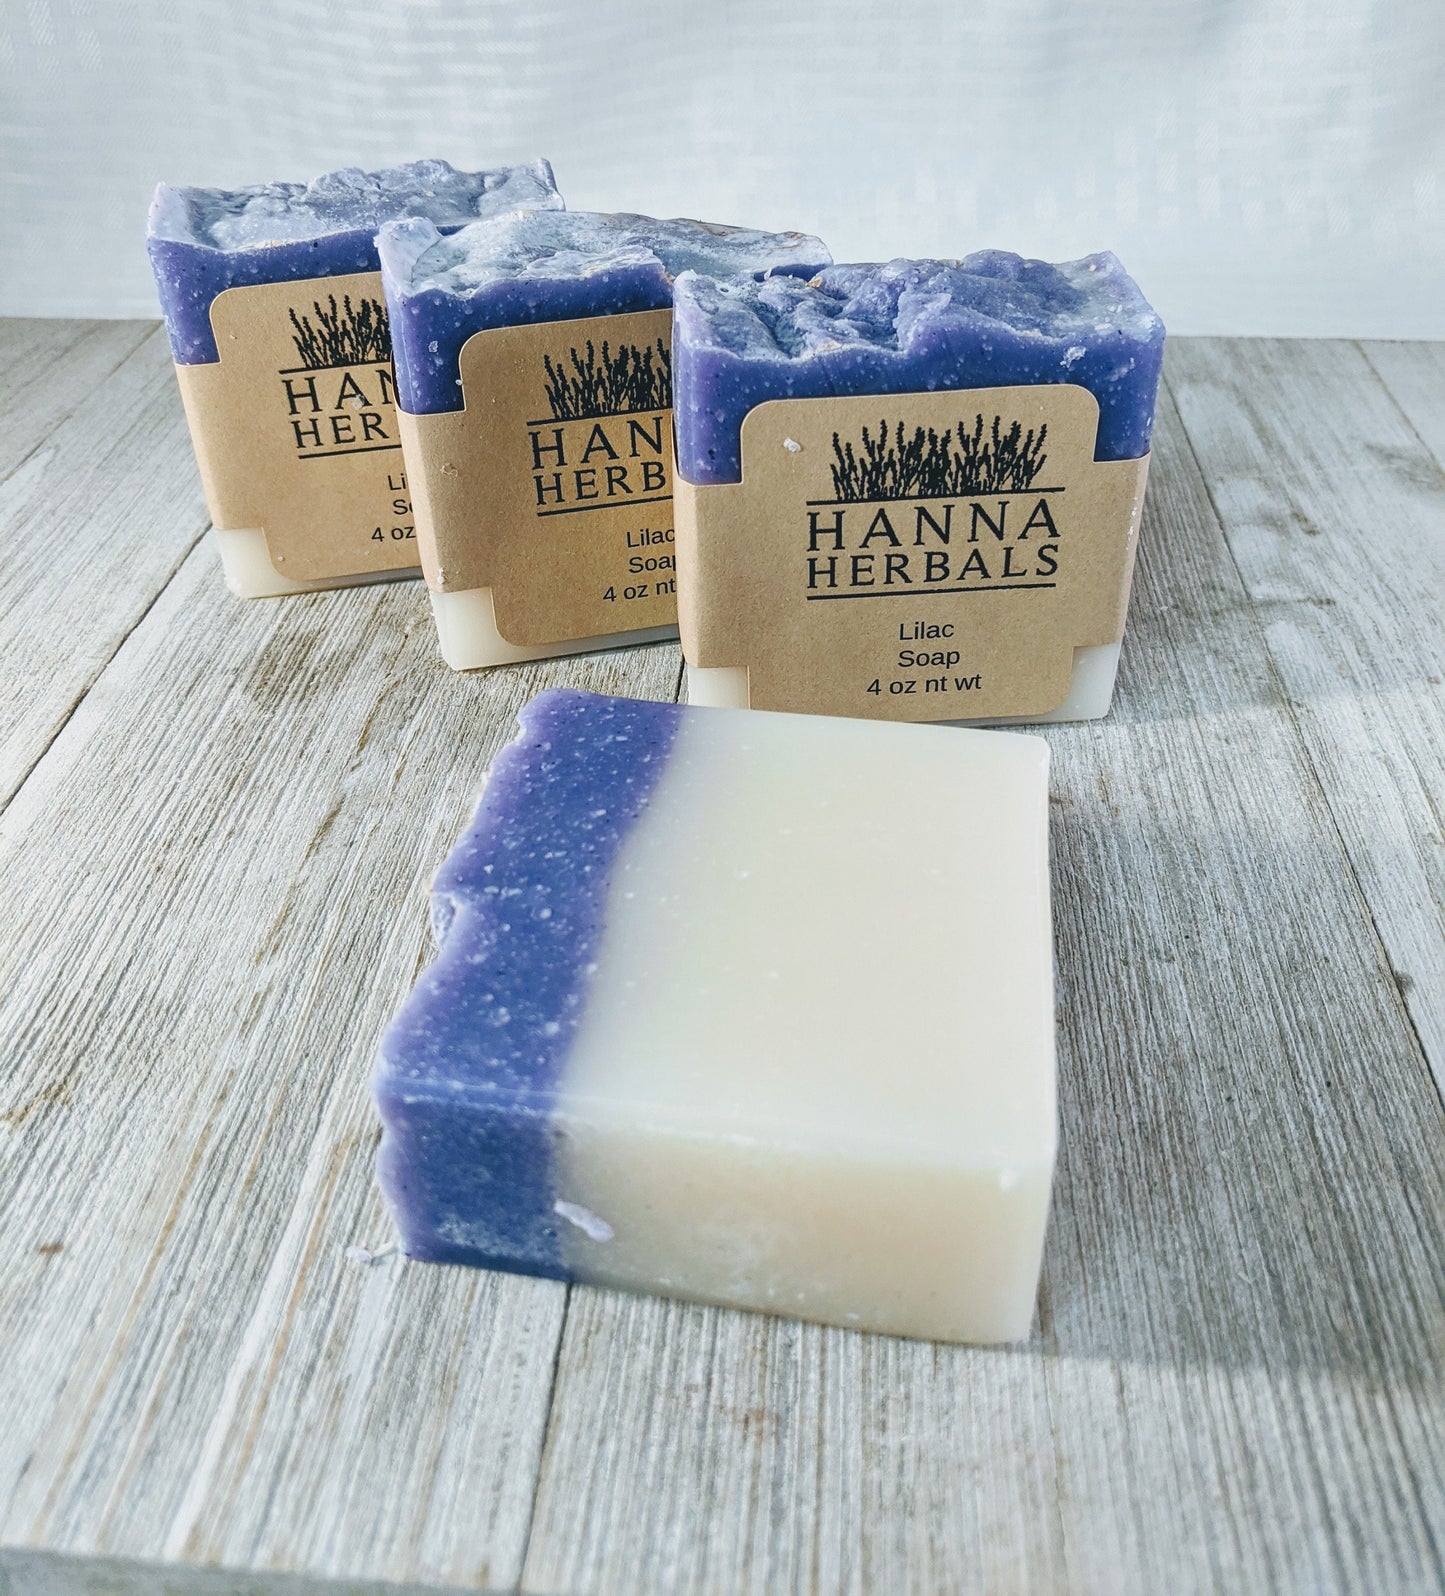 Lilac Soap - Floral Soap - Cold processed soap - artisan soap - all natural soap - handmade soap - homemade soap - gifts for her